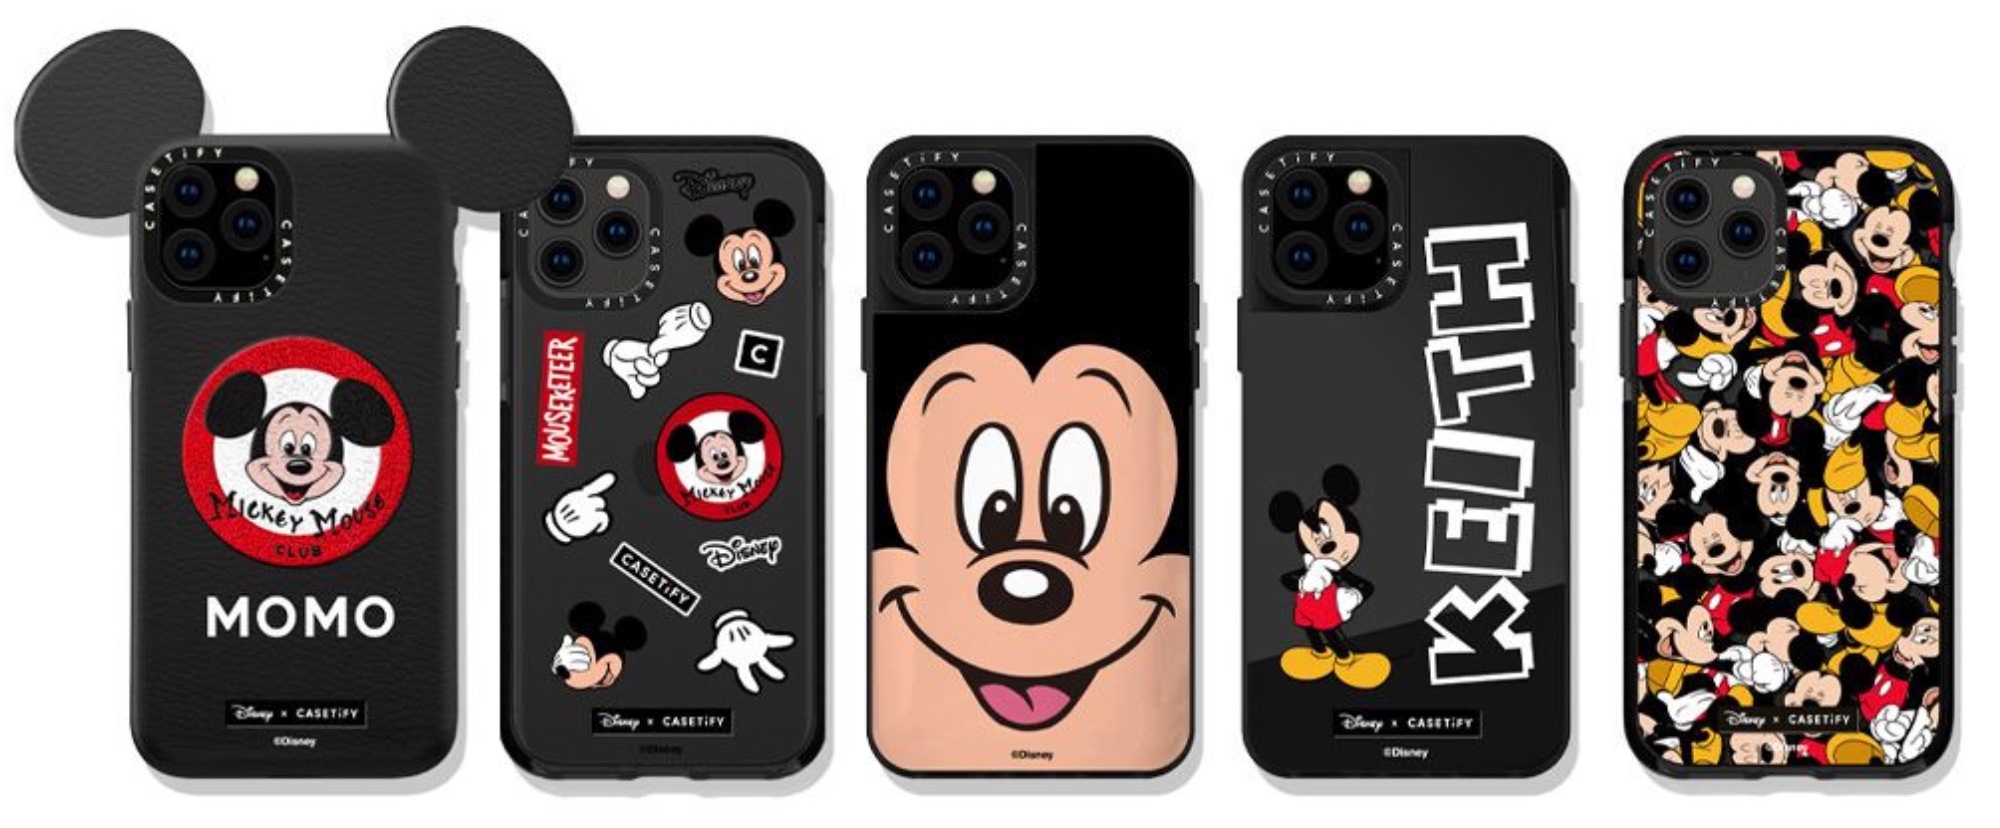 CASETiFY Disney collection drops with iPhone 12 cases